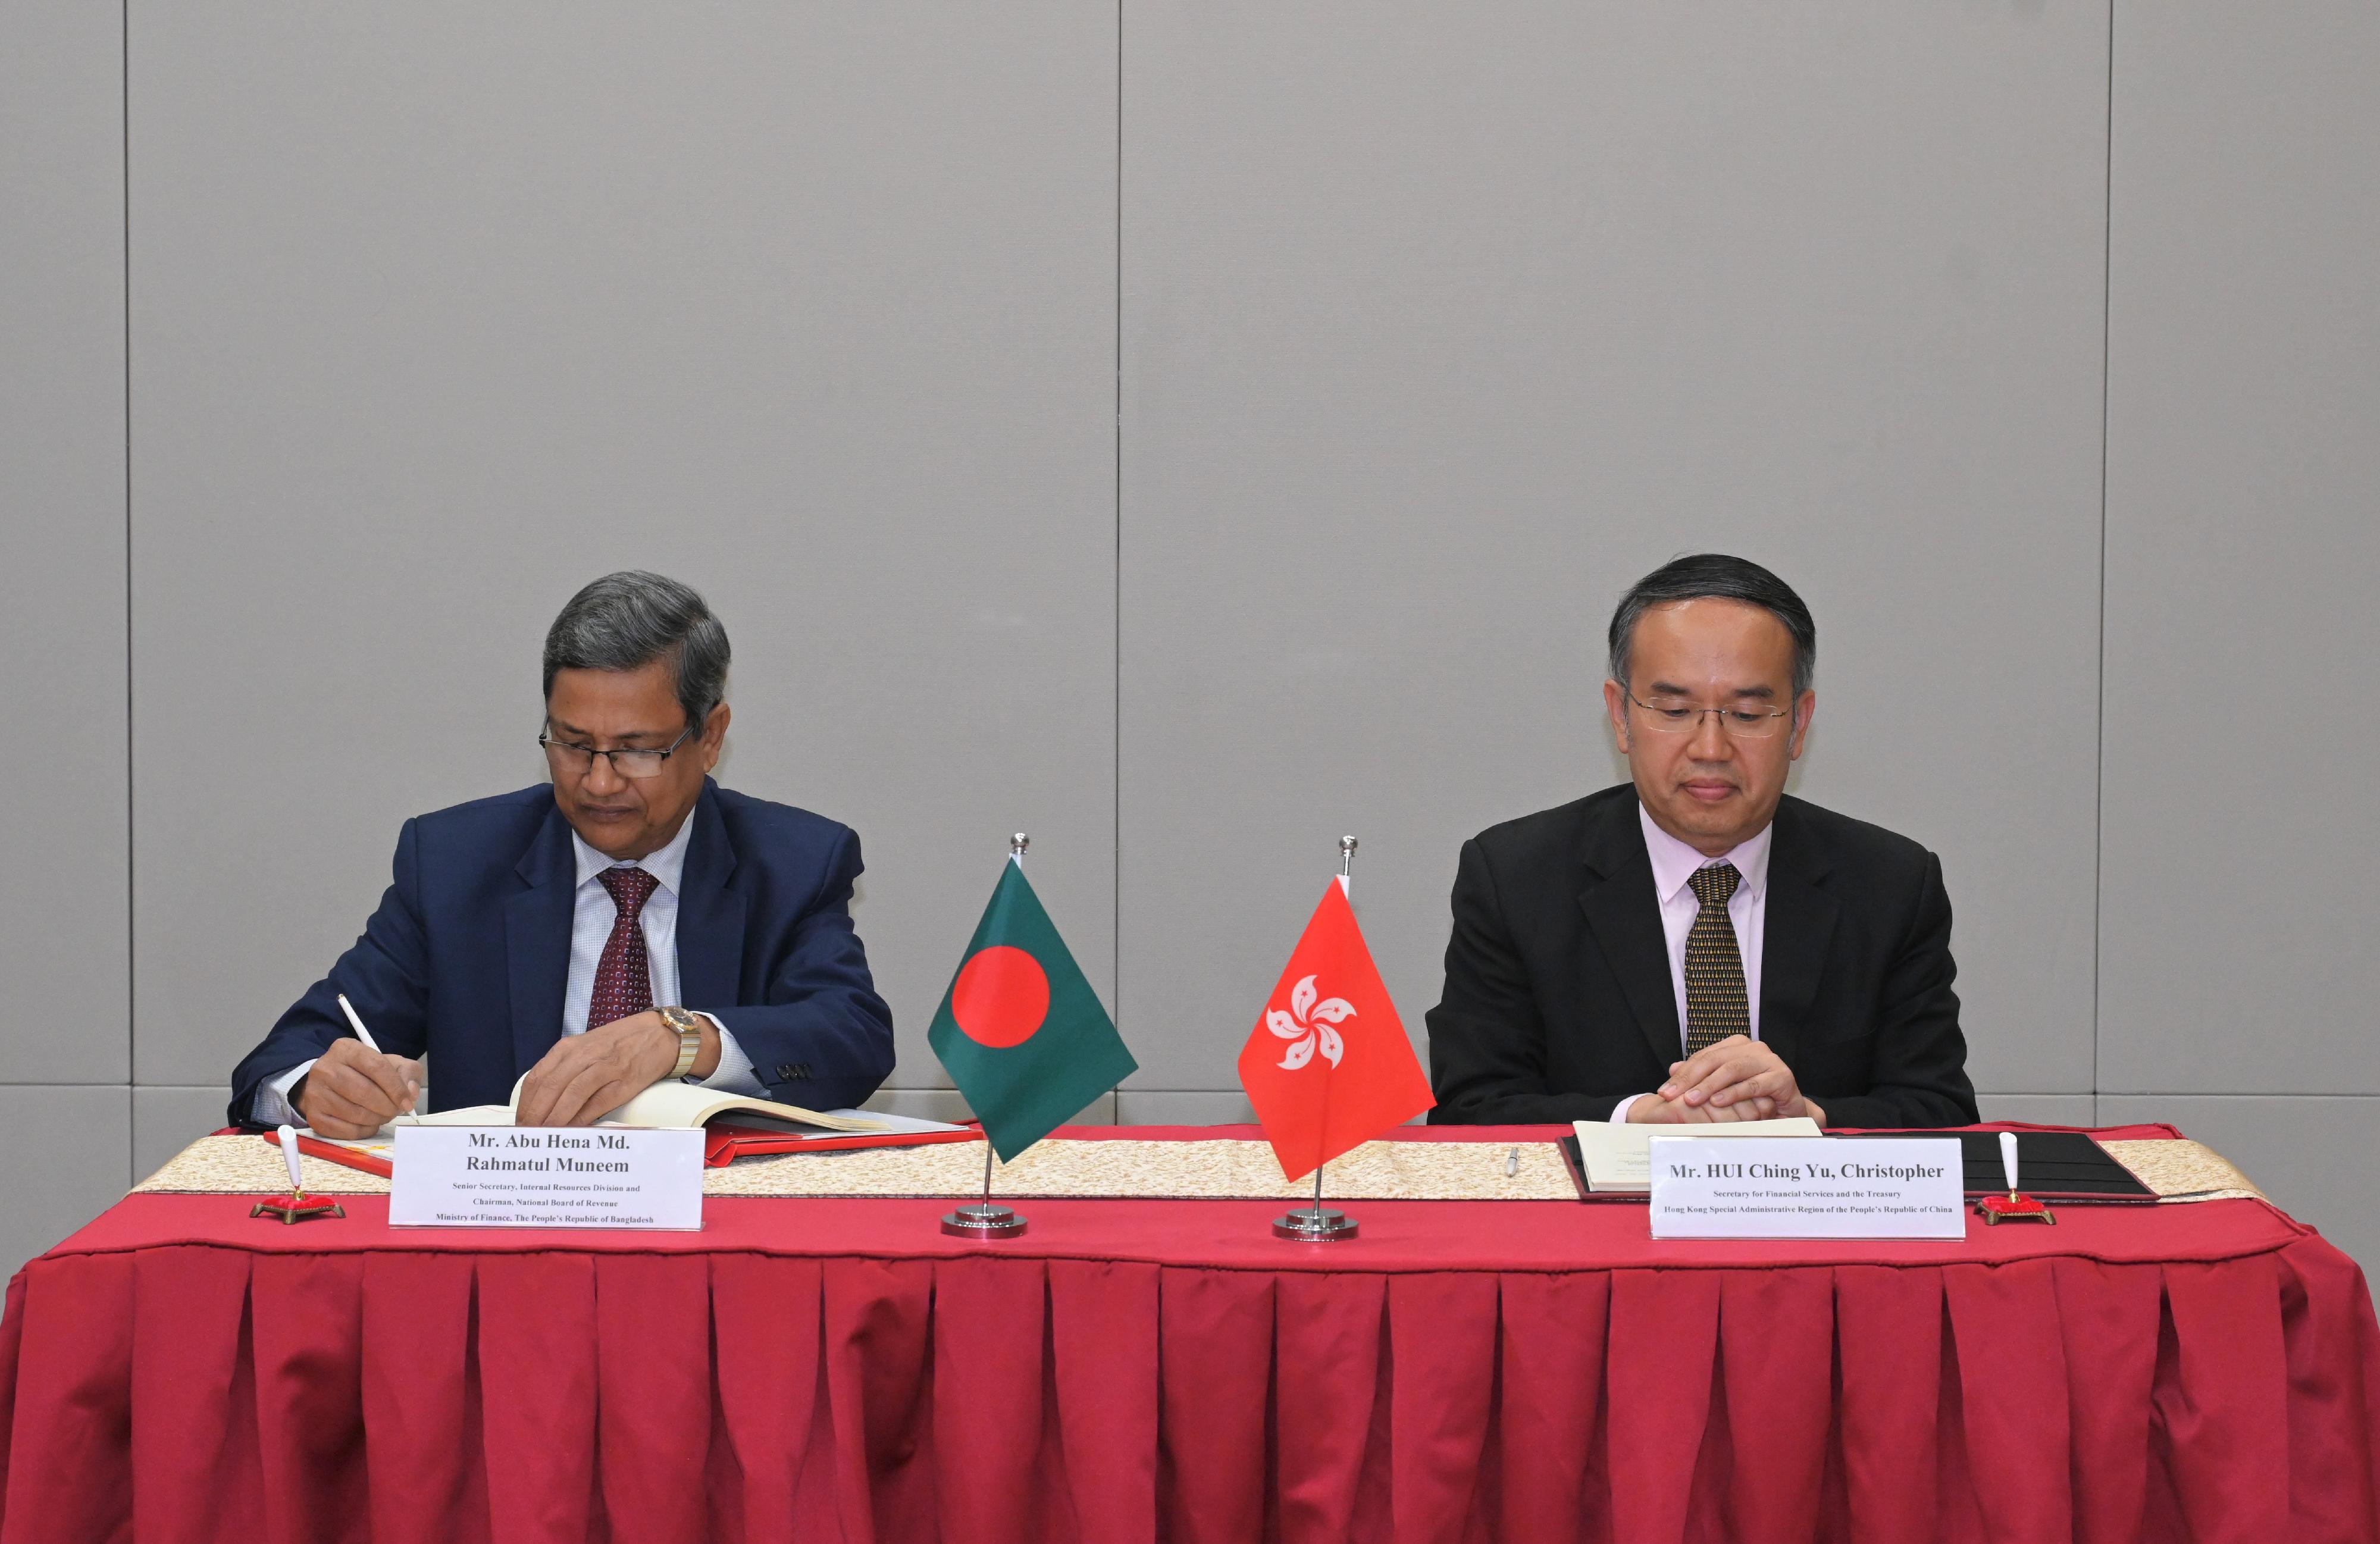 The Secretary for Financial Services and the Treasury, Mr Christopher Hui (right), and the Senior Secretary of the Internal Resources Division and Chairman of the National Board of Revenue of the Ministry of Finance of Bangladesh, Mr Abu Hena Md. Rahmatul Muneem (left), today (August 30) sign a comprehensive avoidance of double taxation agreement.